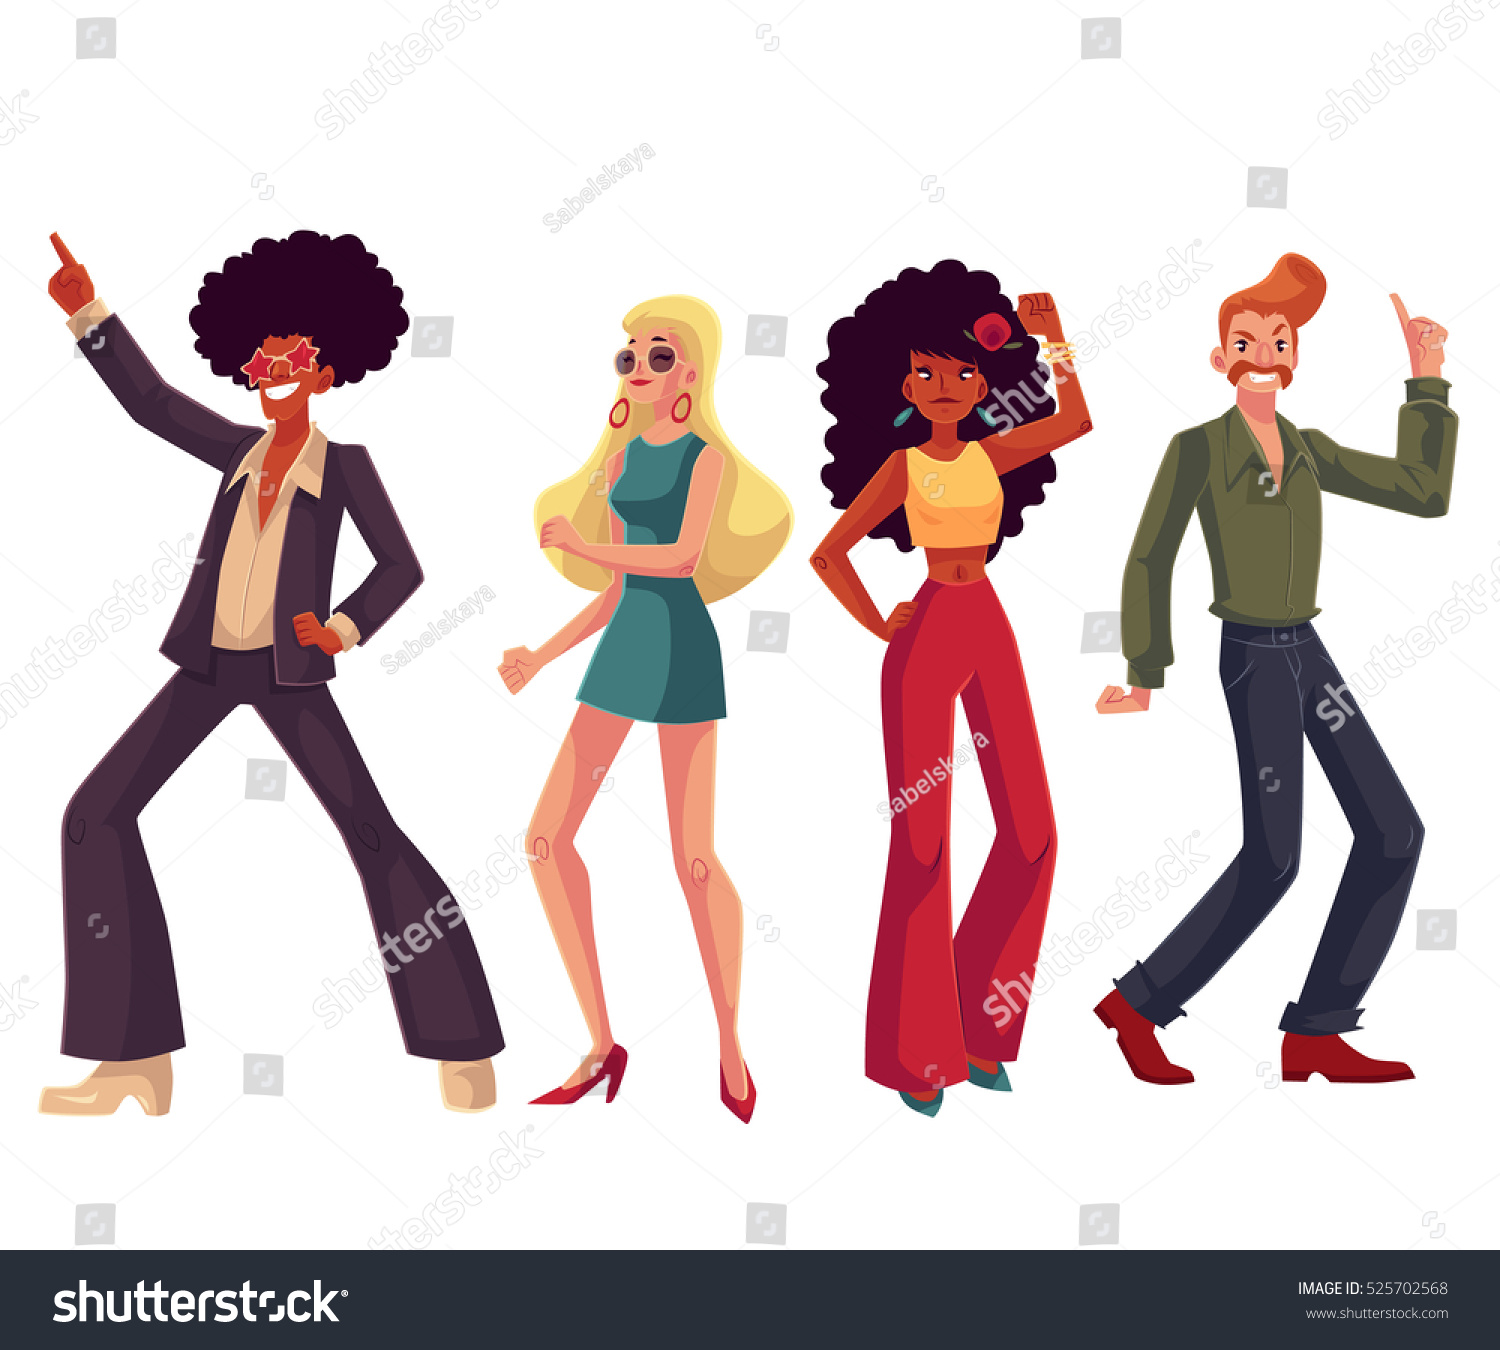 SVG of People in 1970s style clothes dancing disco, cartoon style vector illustration isolated on white background. Men and women in 60s, 70s style clothing dancing at retro disco party svg